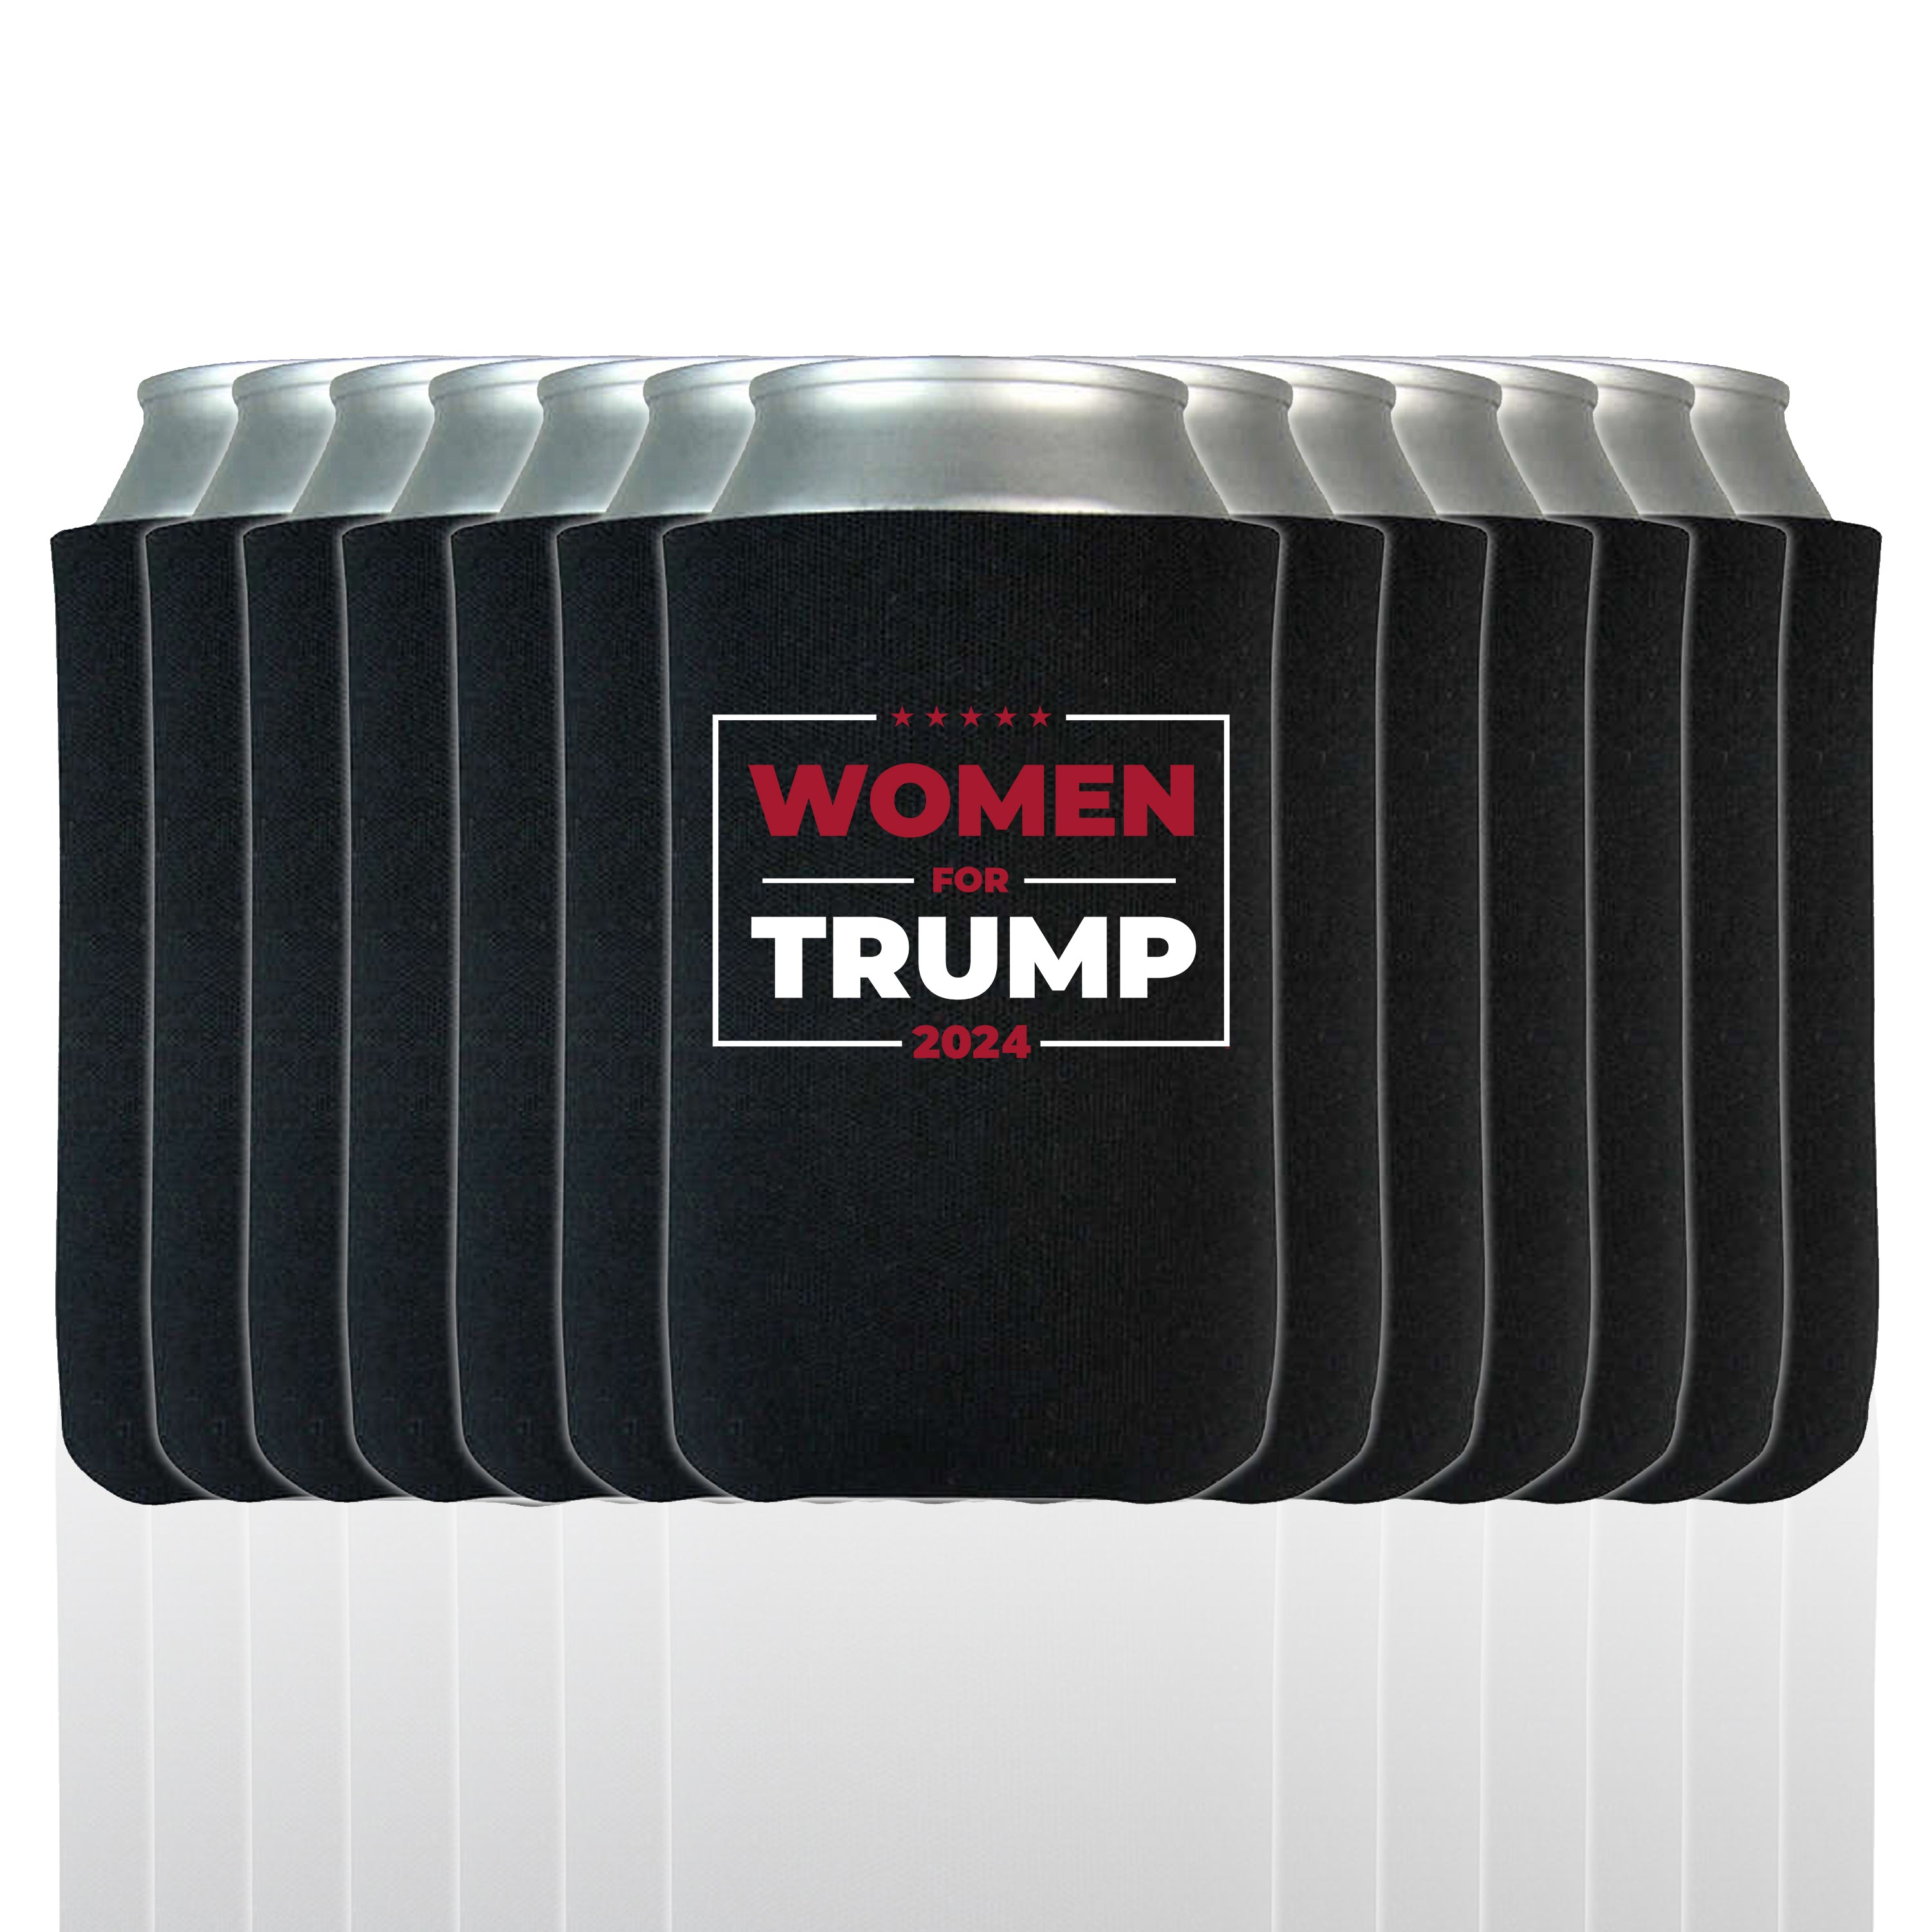 S4E® Women for Trump 2024 Political Can Coolie, Insulating Sleeve Holder for Beverage Cups